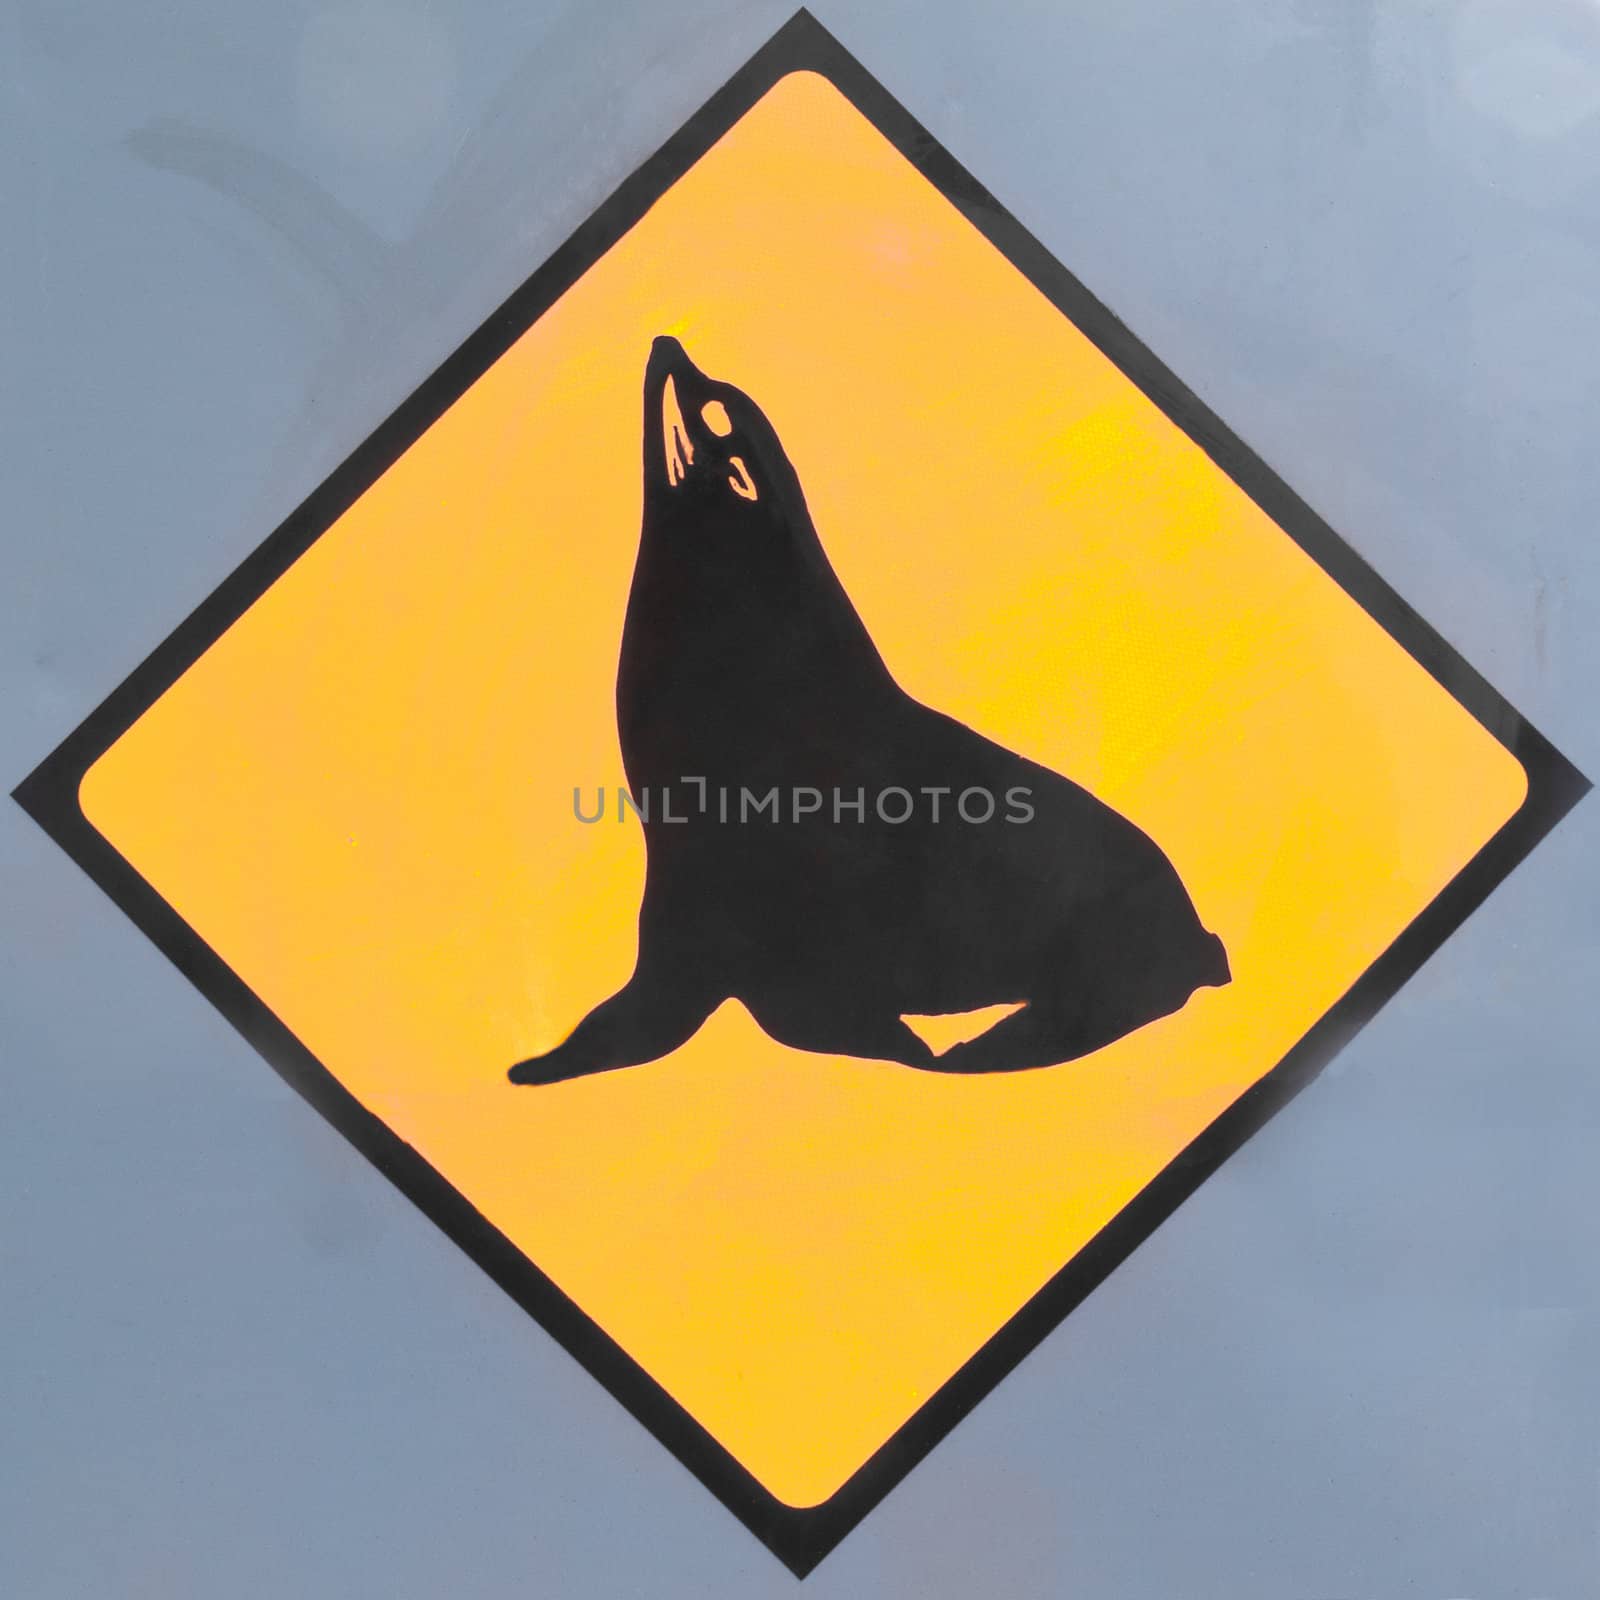 Attention Seals or Sealions on Road Sign by PiLens